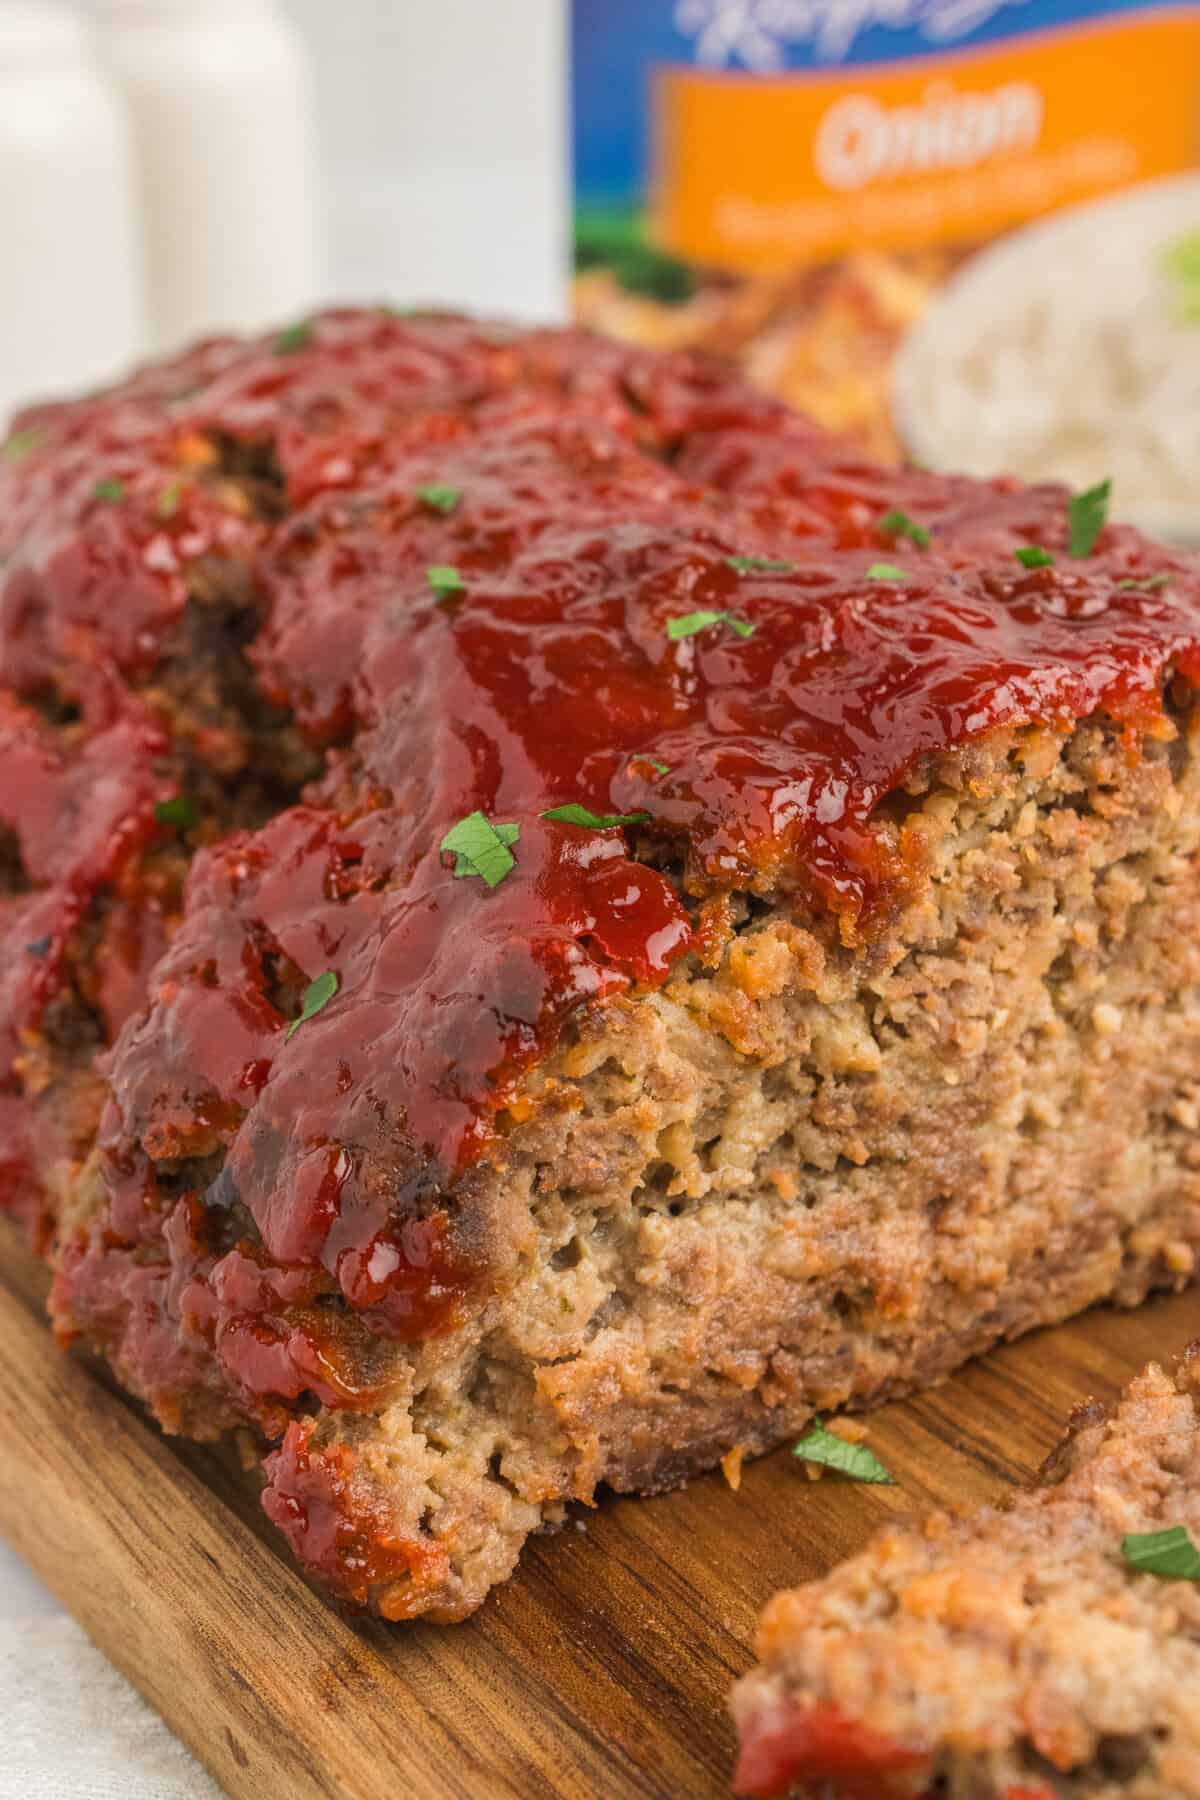 Lipton onion soup mix meatloaf with ketchup glaze on a cutting board with box of soup mix in background.